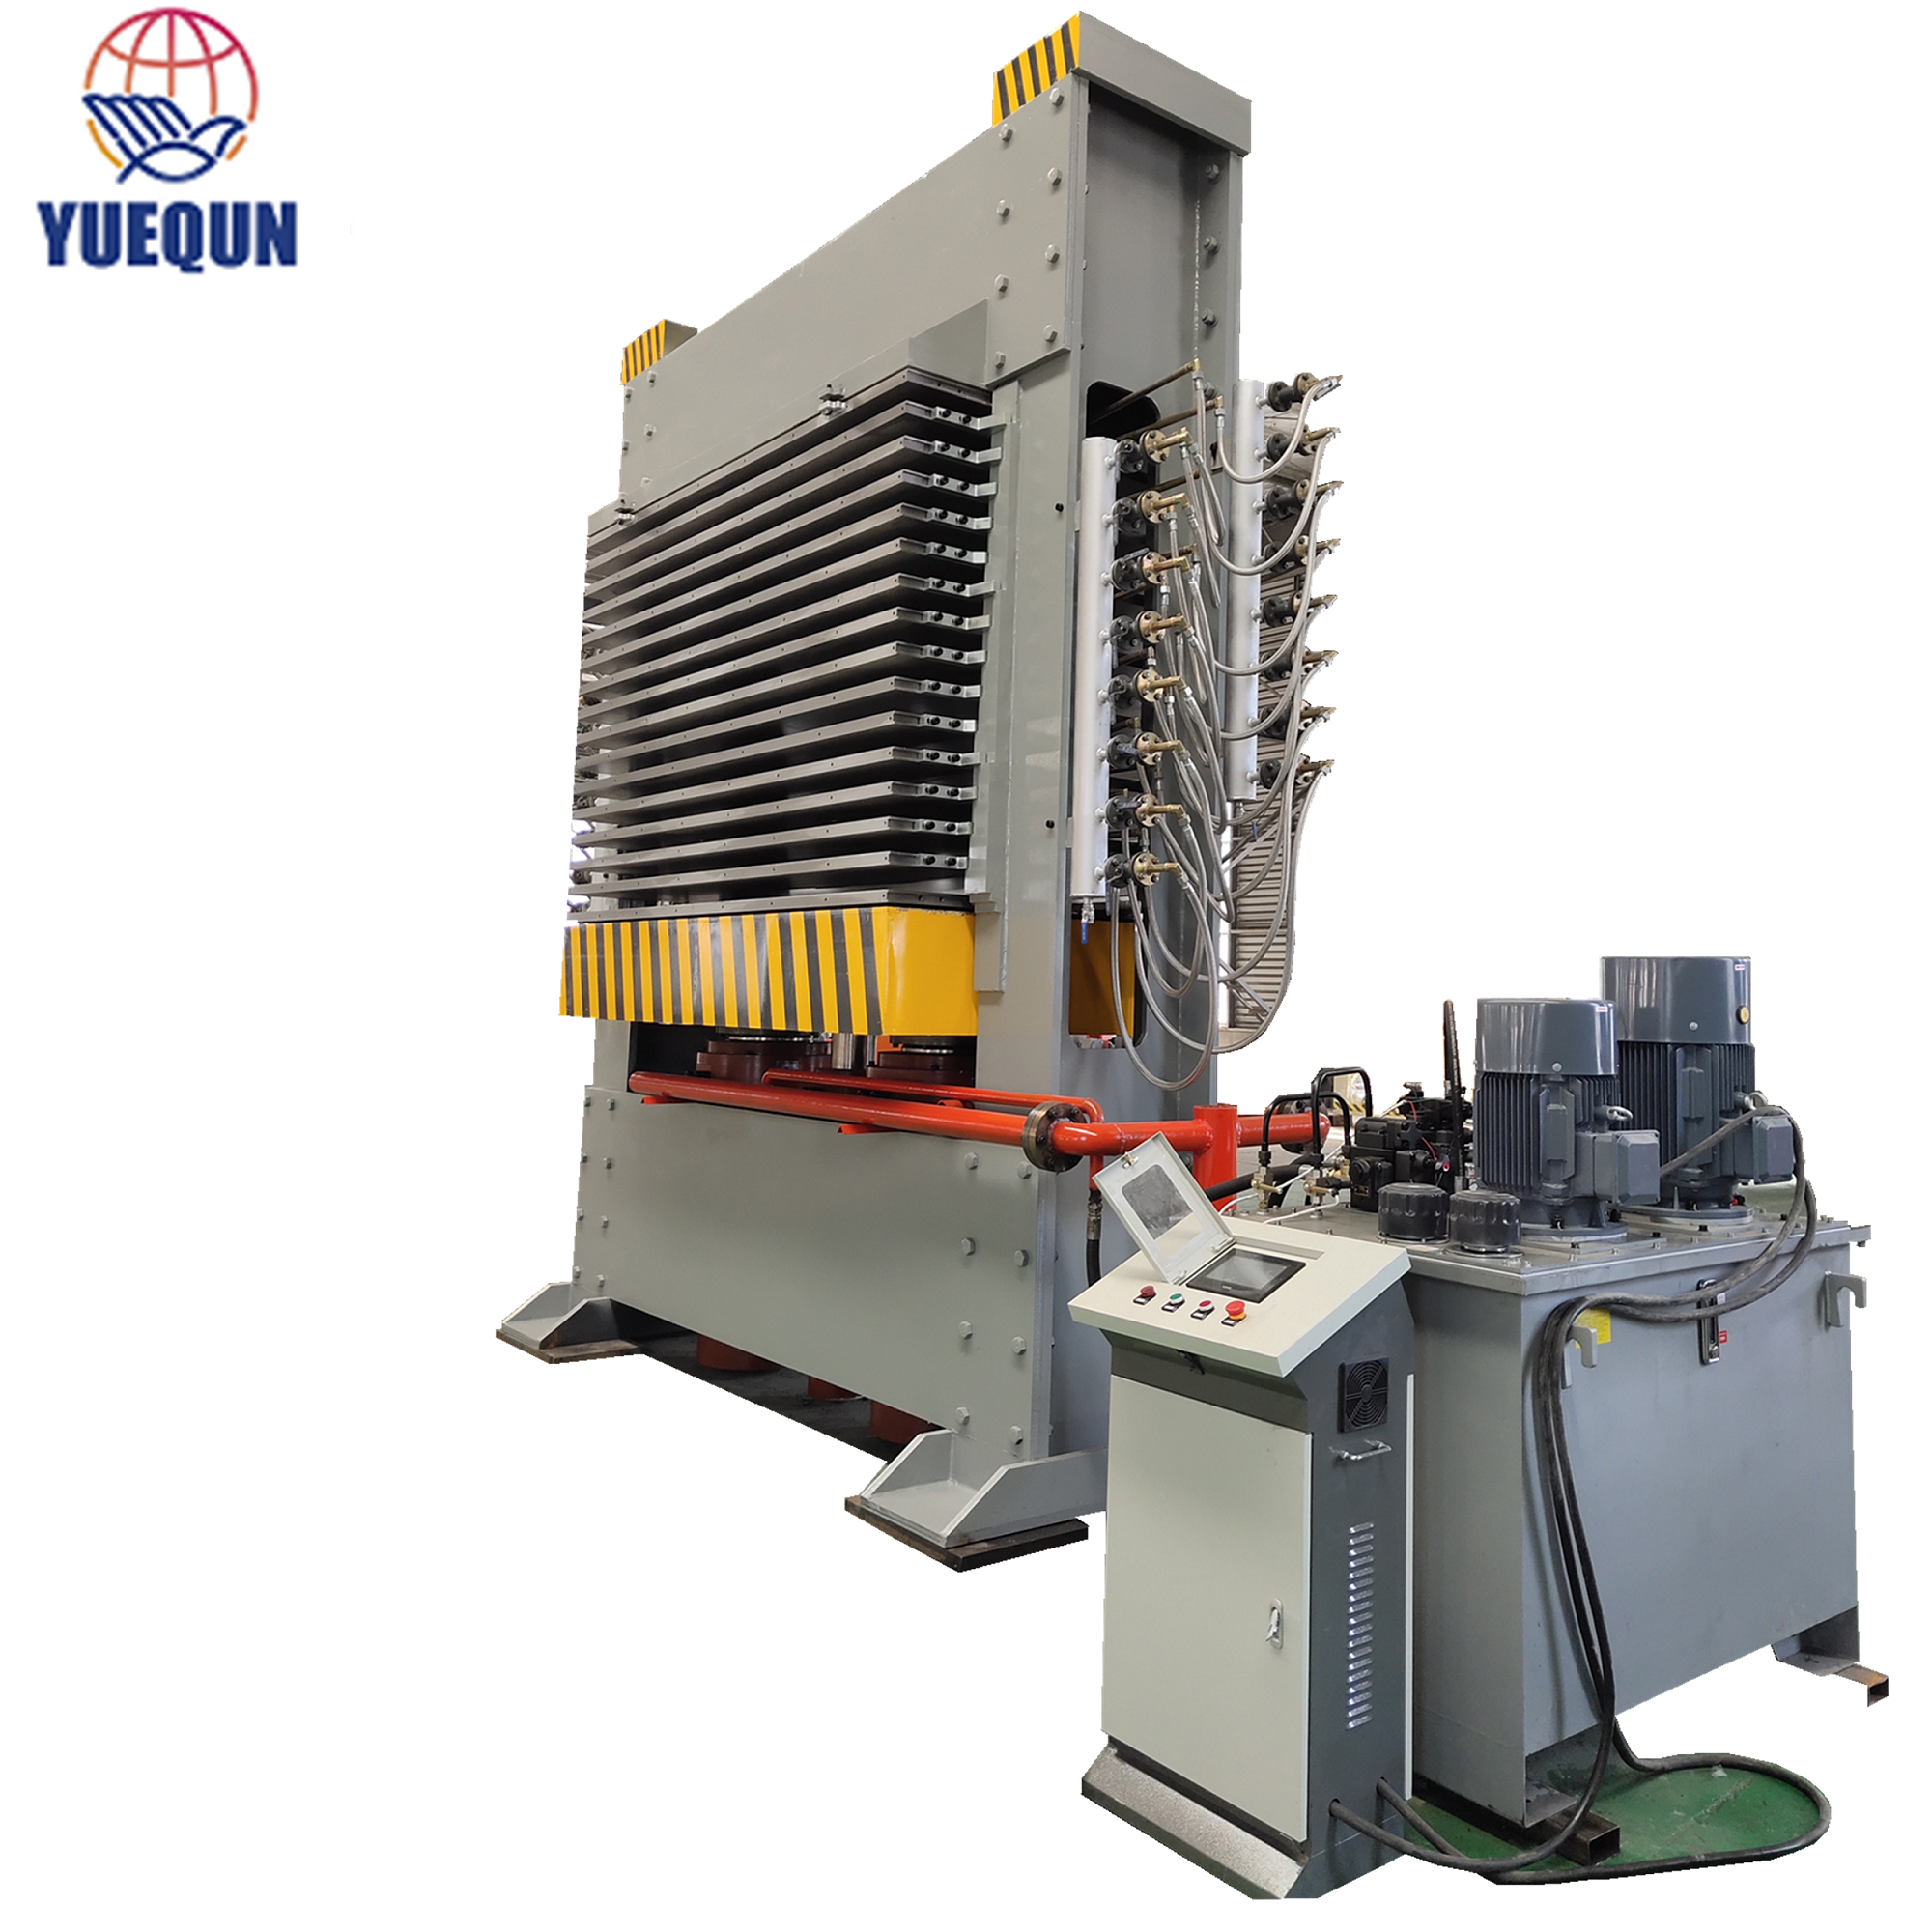 hot press machine for plywood